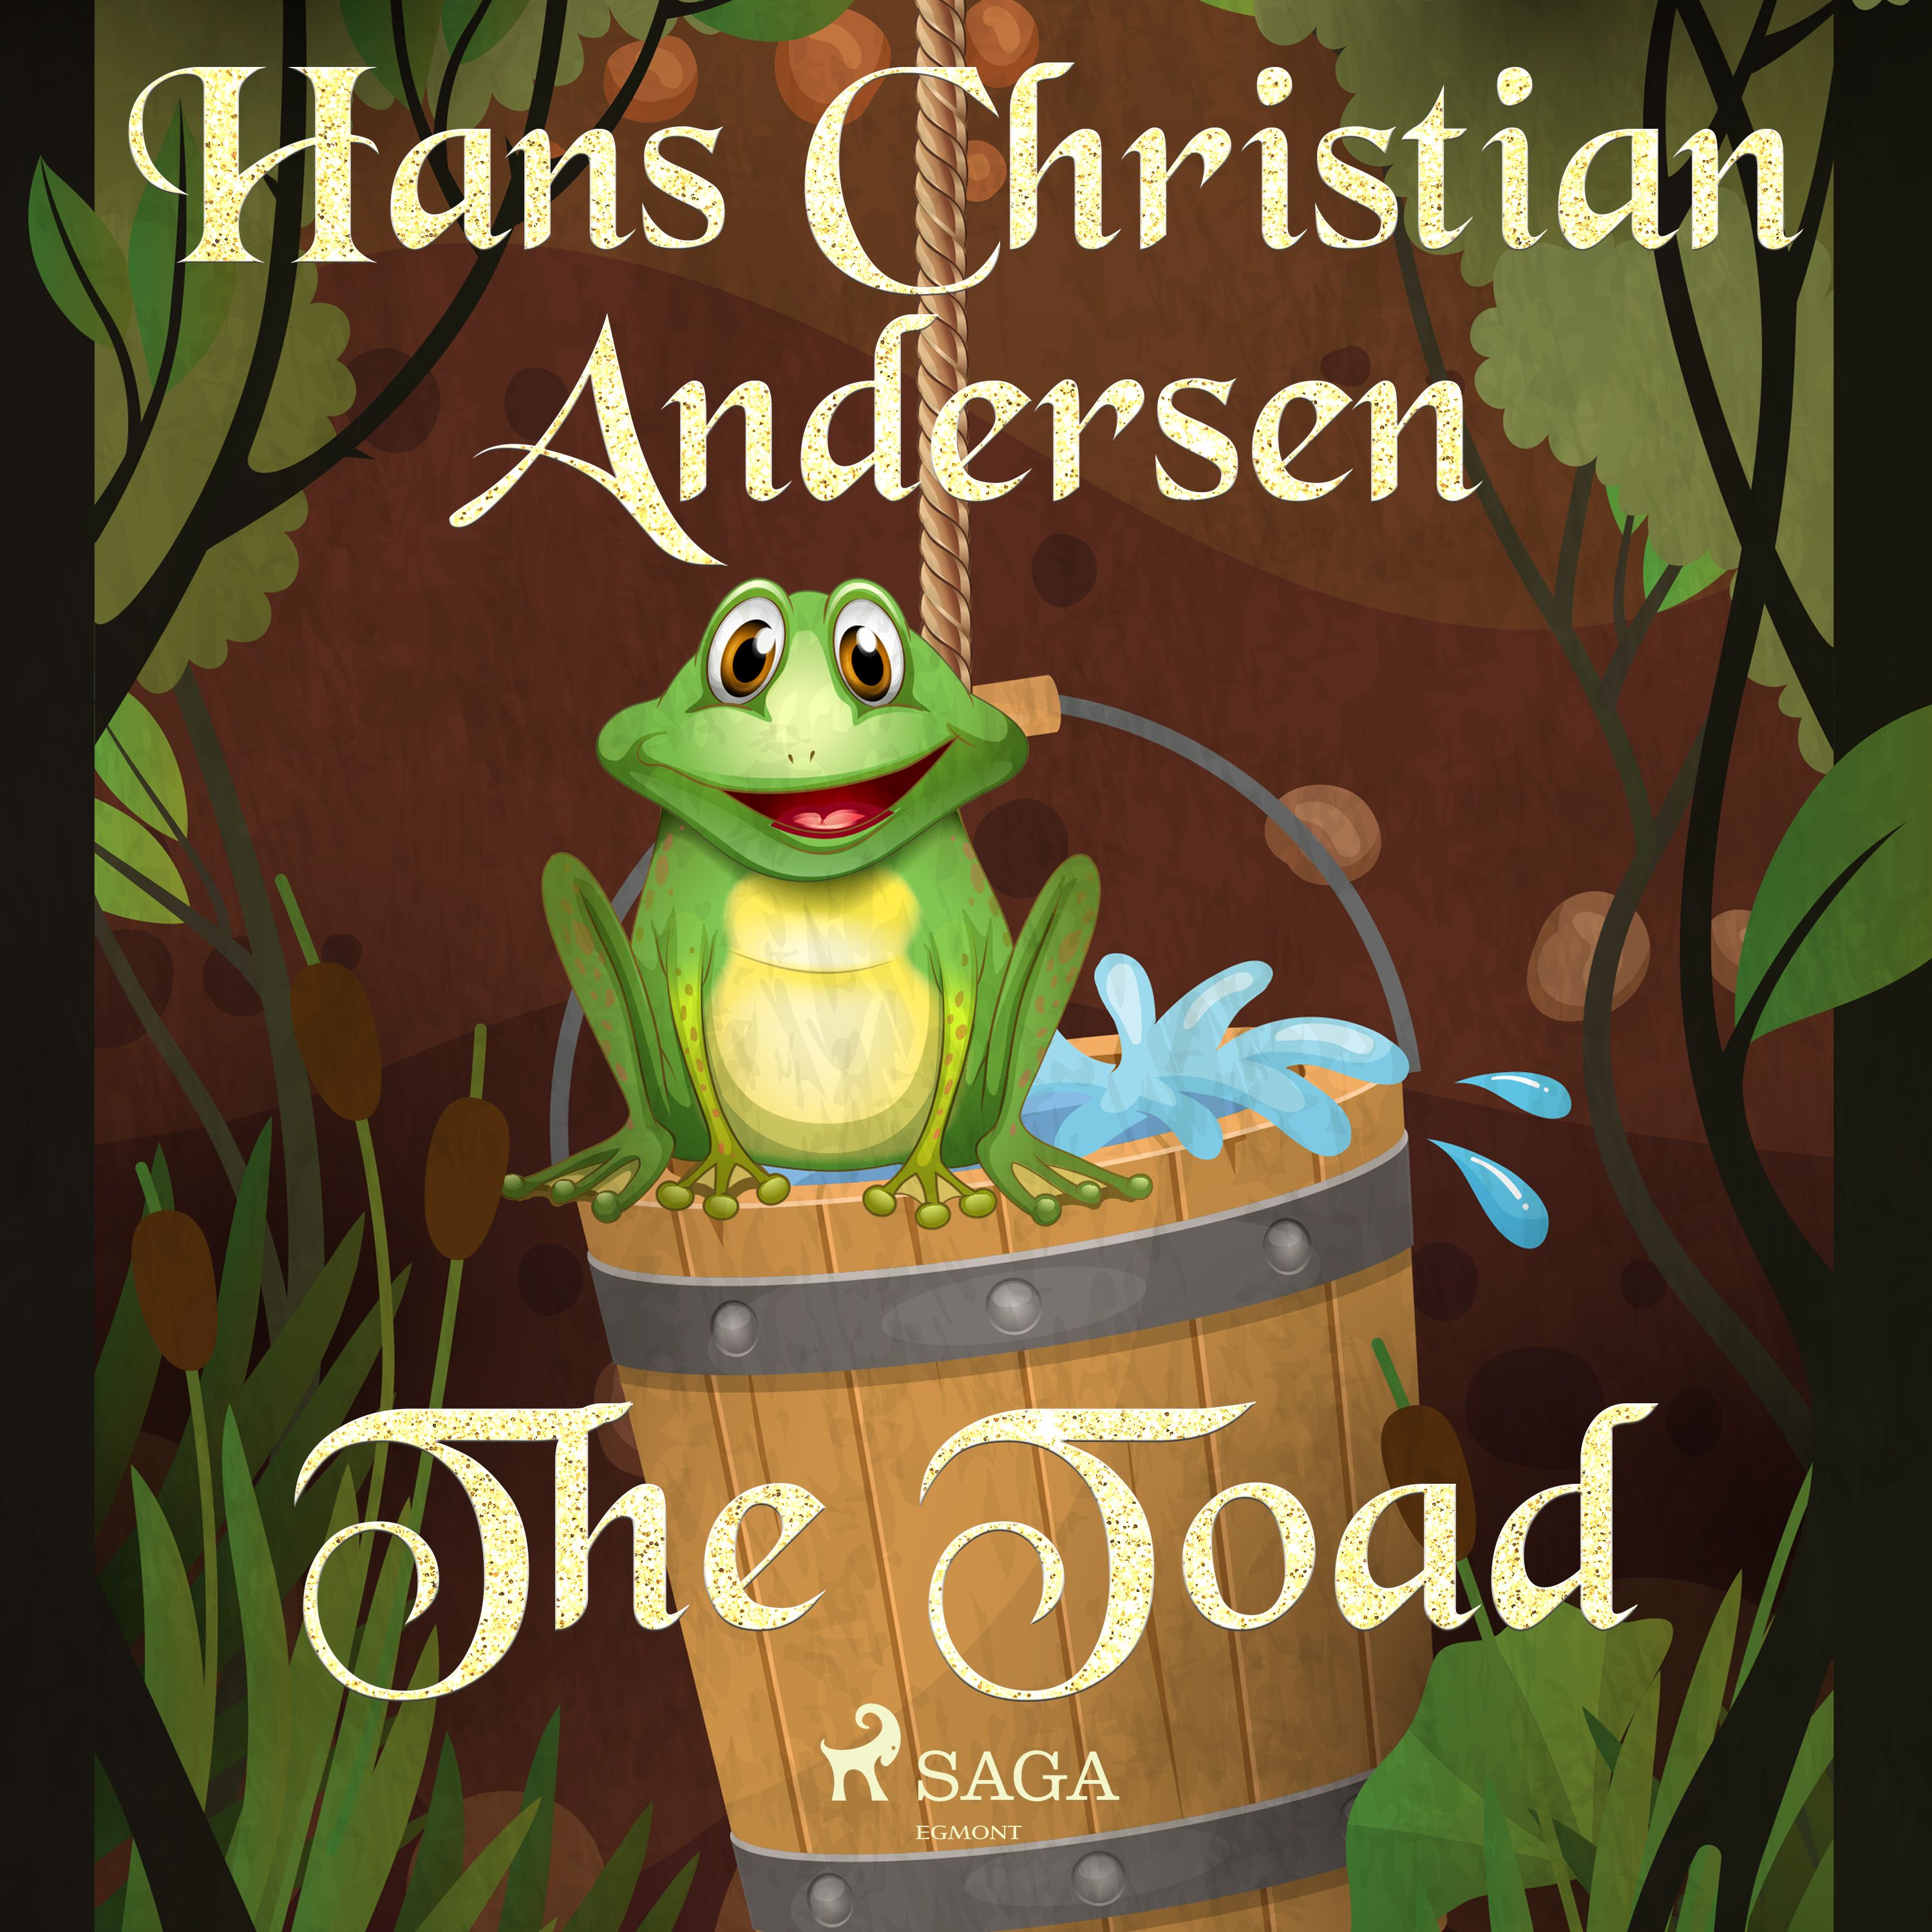 The Toad, audiobook by Hans Christian Andersen